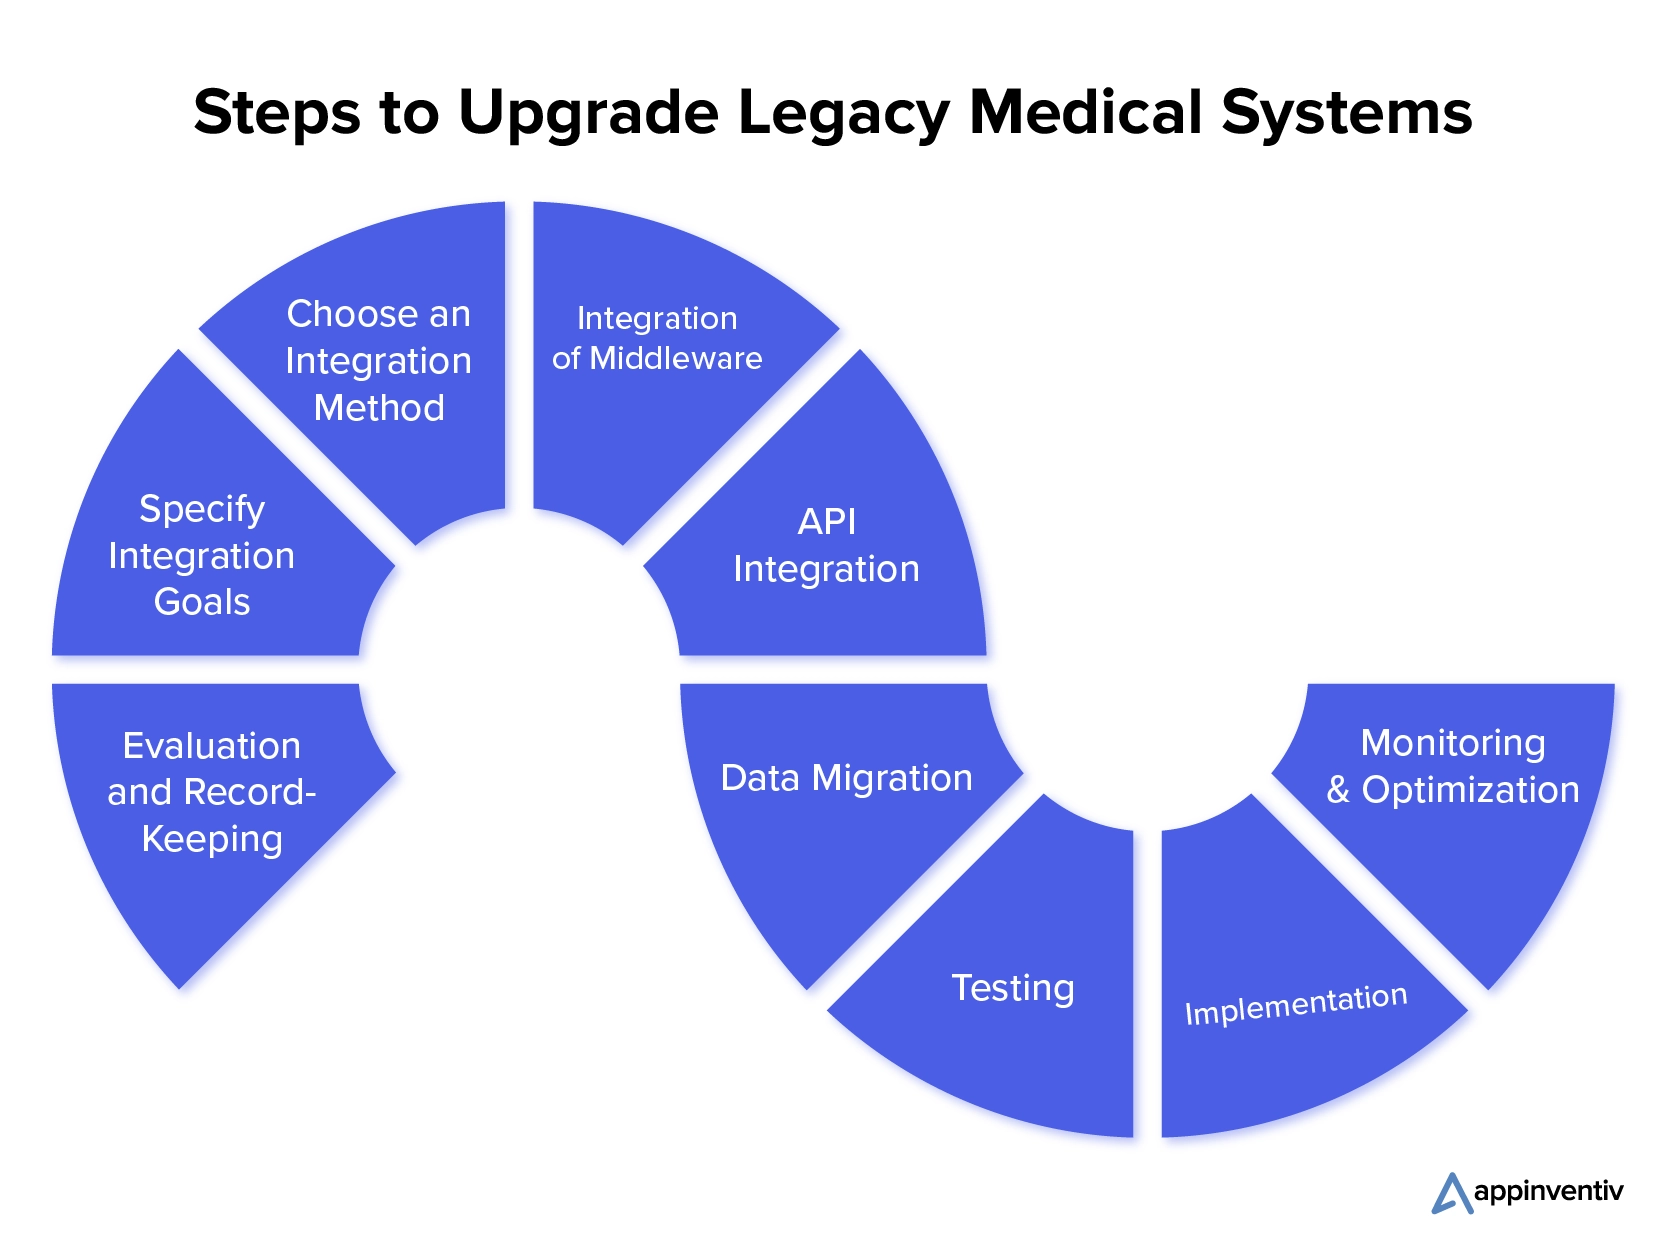 Top Methods of Upgrading Legacy Medical Systems